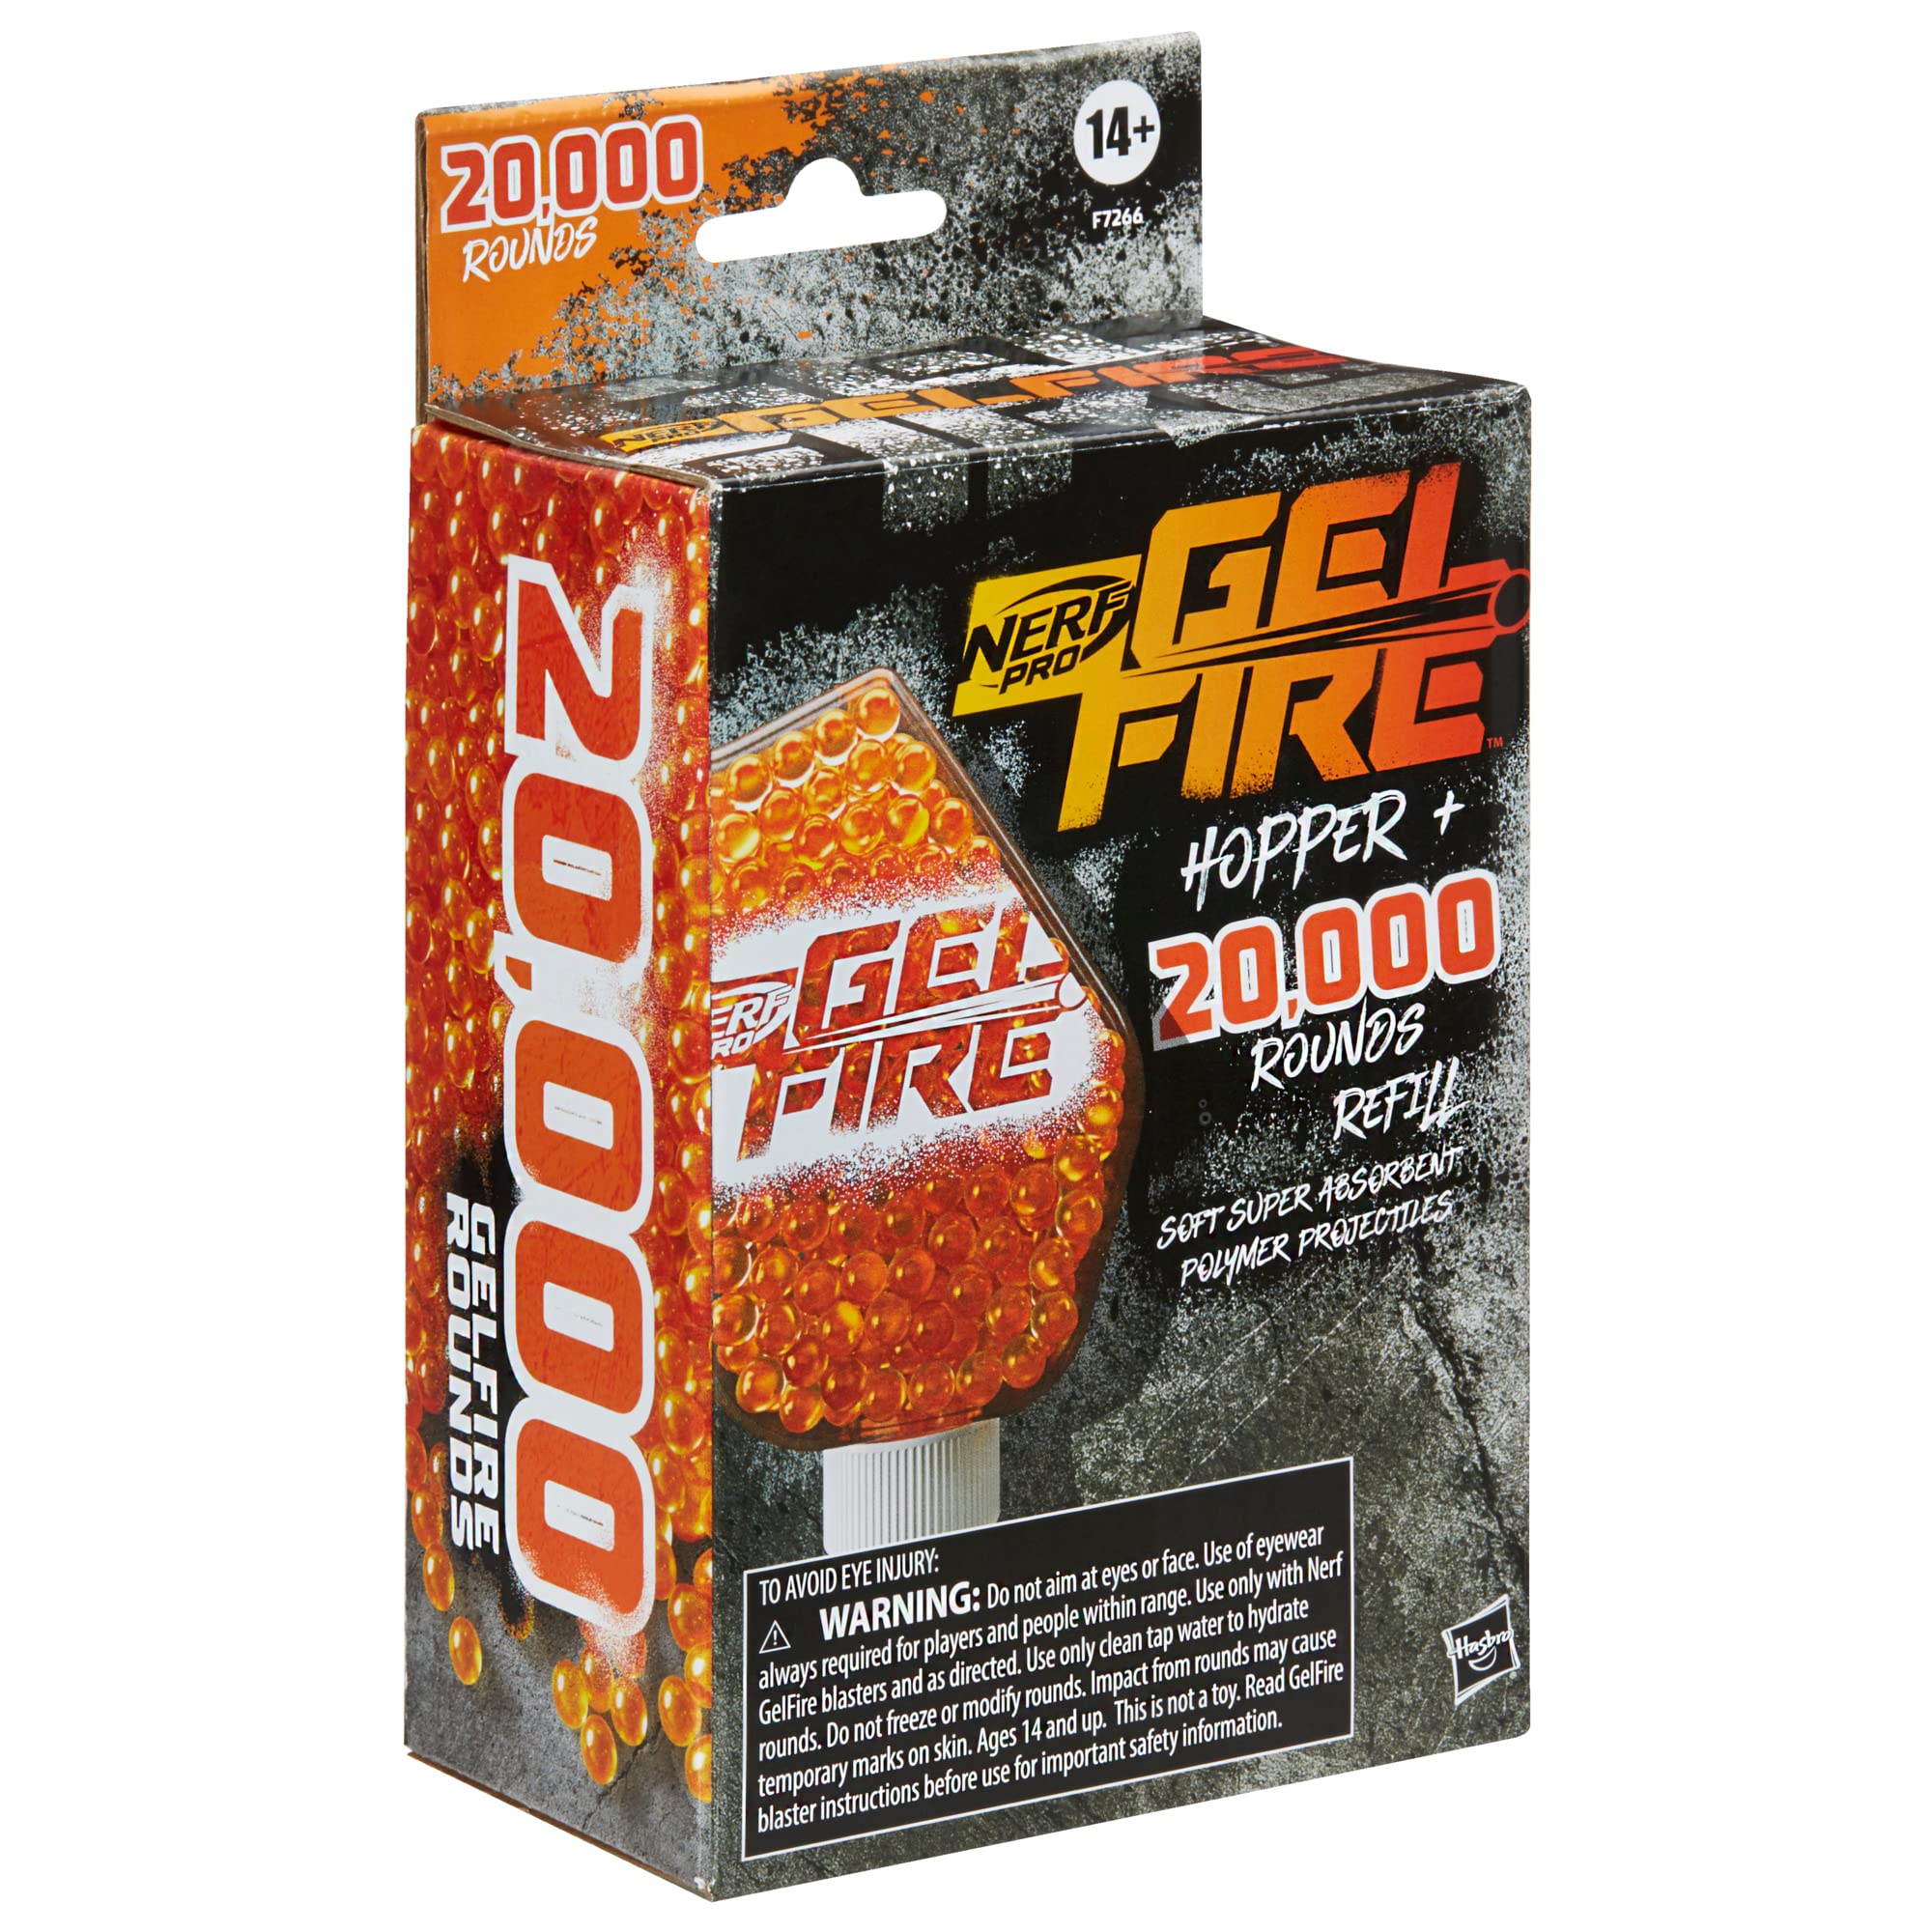 NERF Pro Gelfire Refill, 20,000 Dehydrated Gelfire Rounds, 1x 800 Round Hopper, Use Pro Gelfire Blasters, Ages 14 & Up